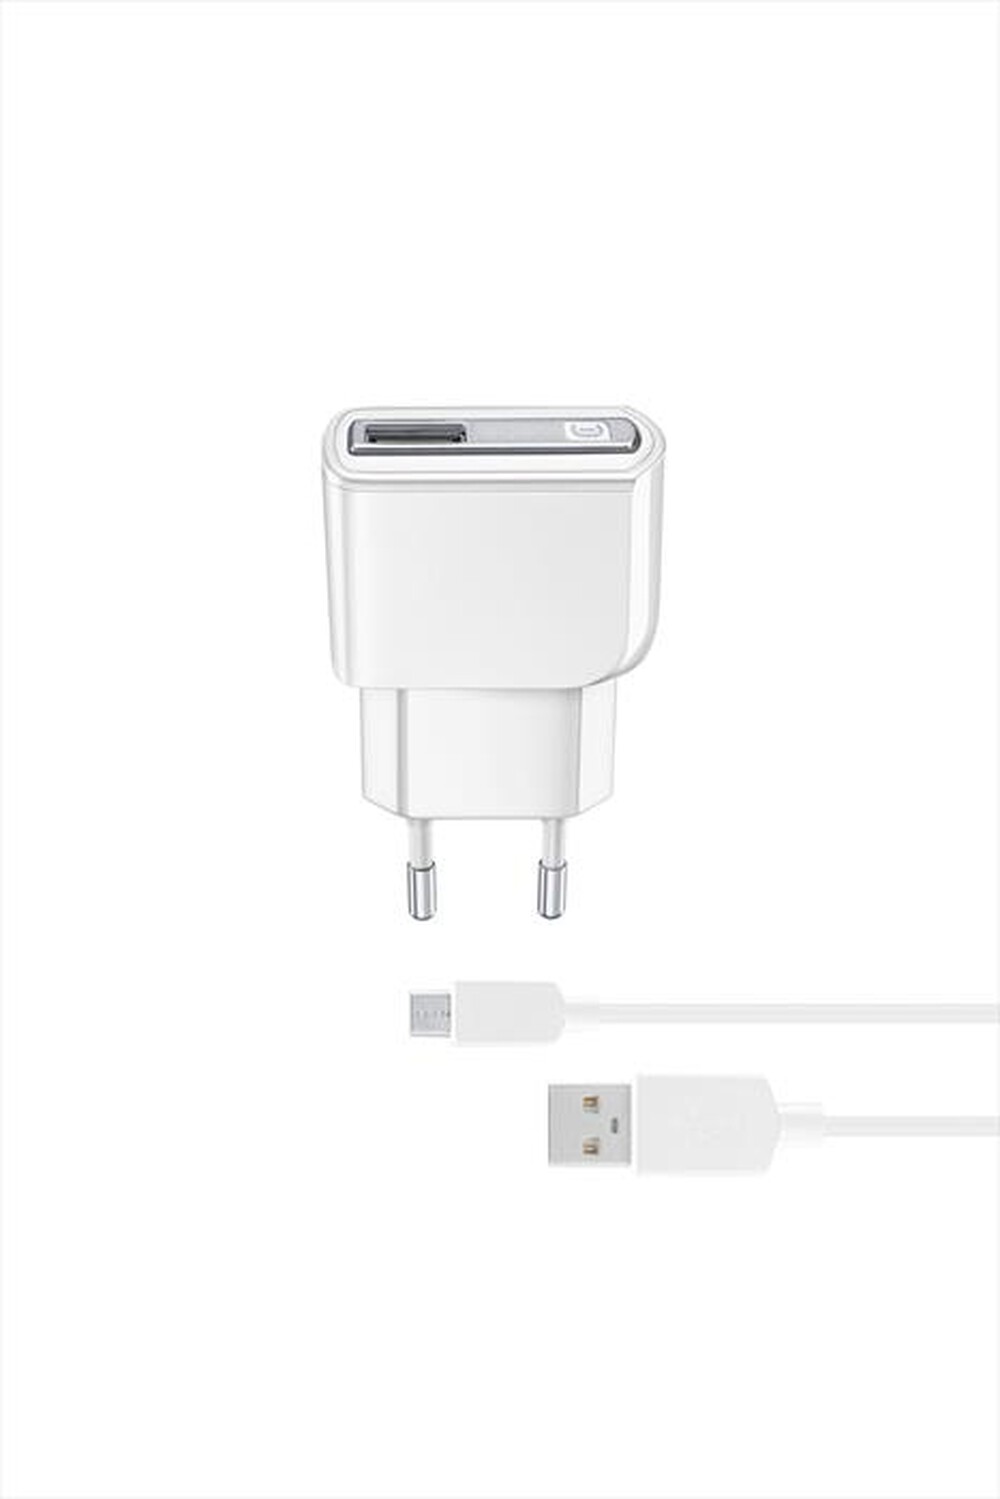 "CELLULARLINE - USB Charger Compact Kit-Bianco"